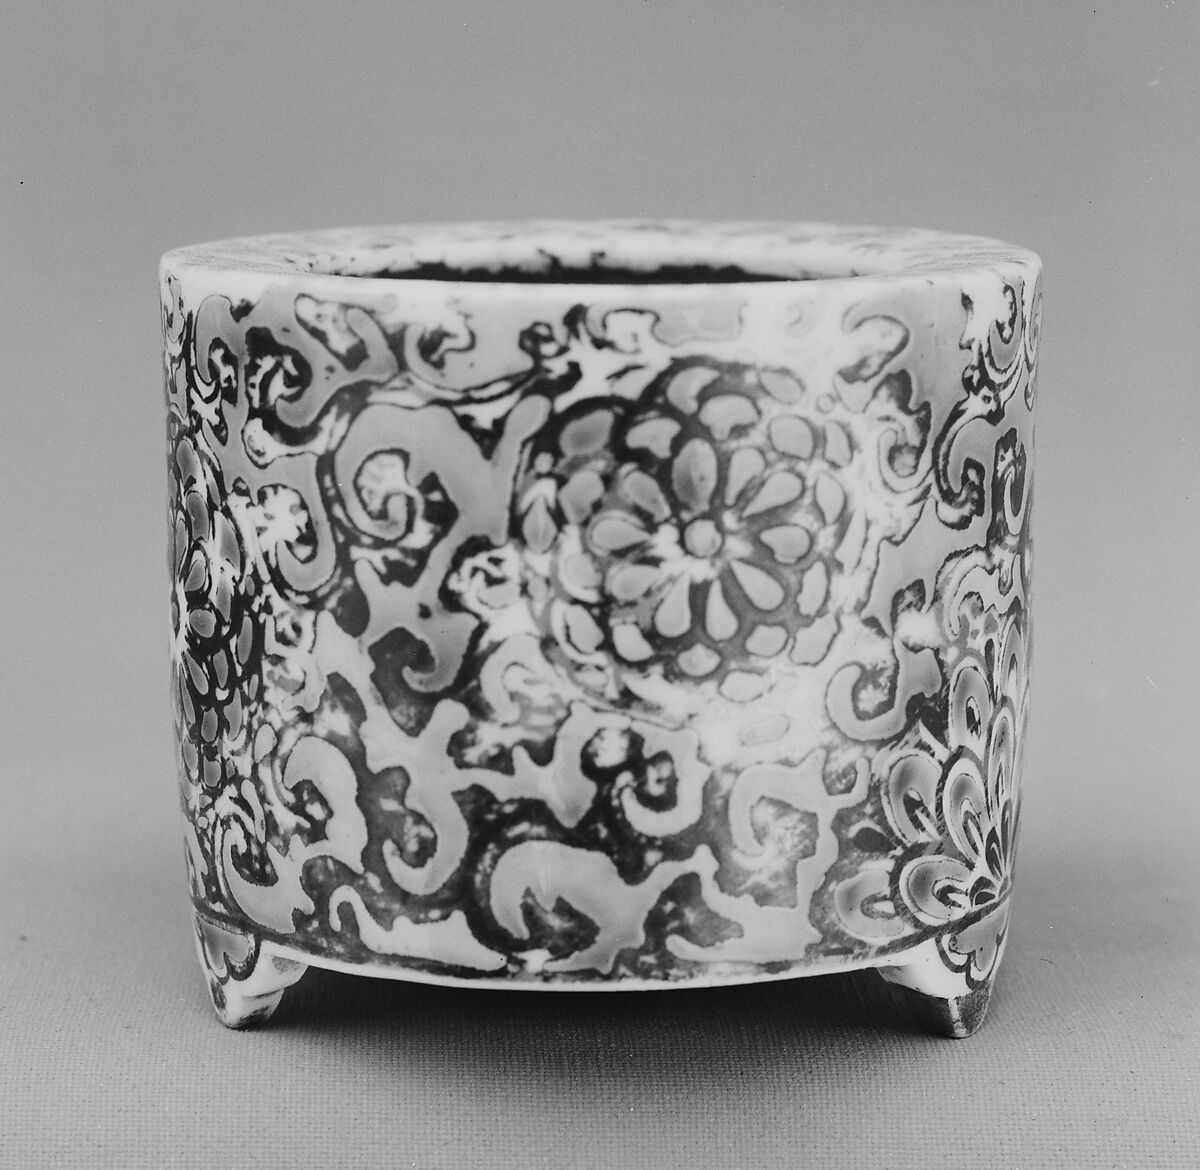 Incense Burner, White porcelain decorated with enamels and gold (Hizen ware, Kutani type), Japan 